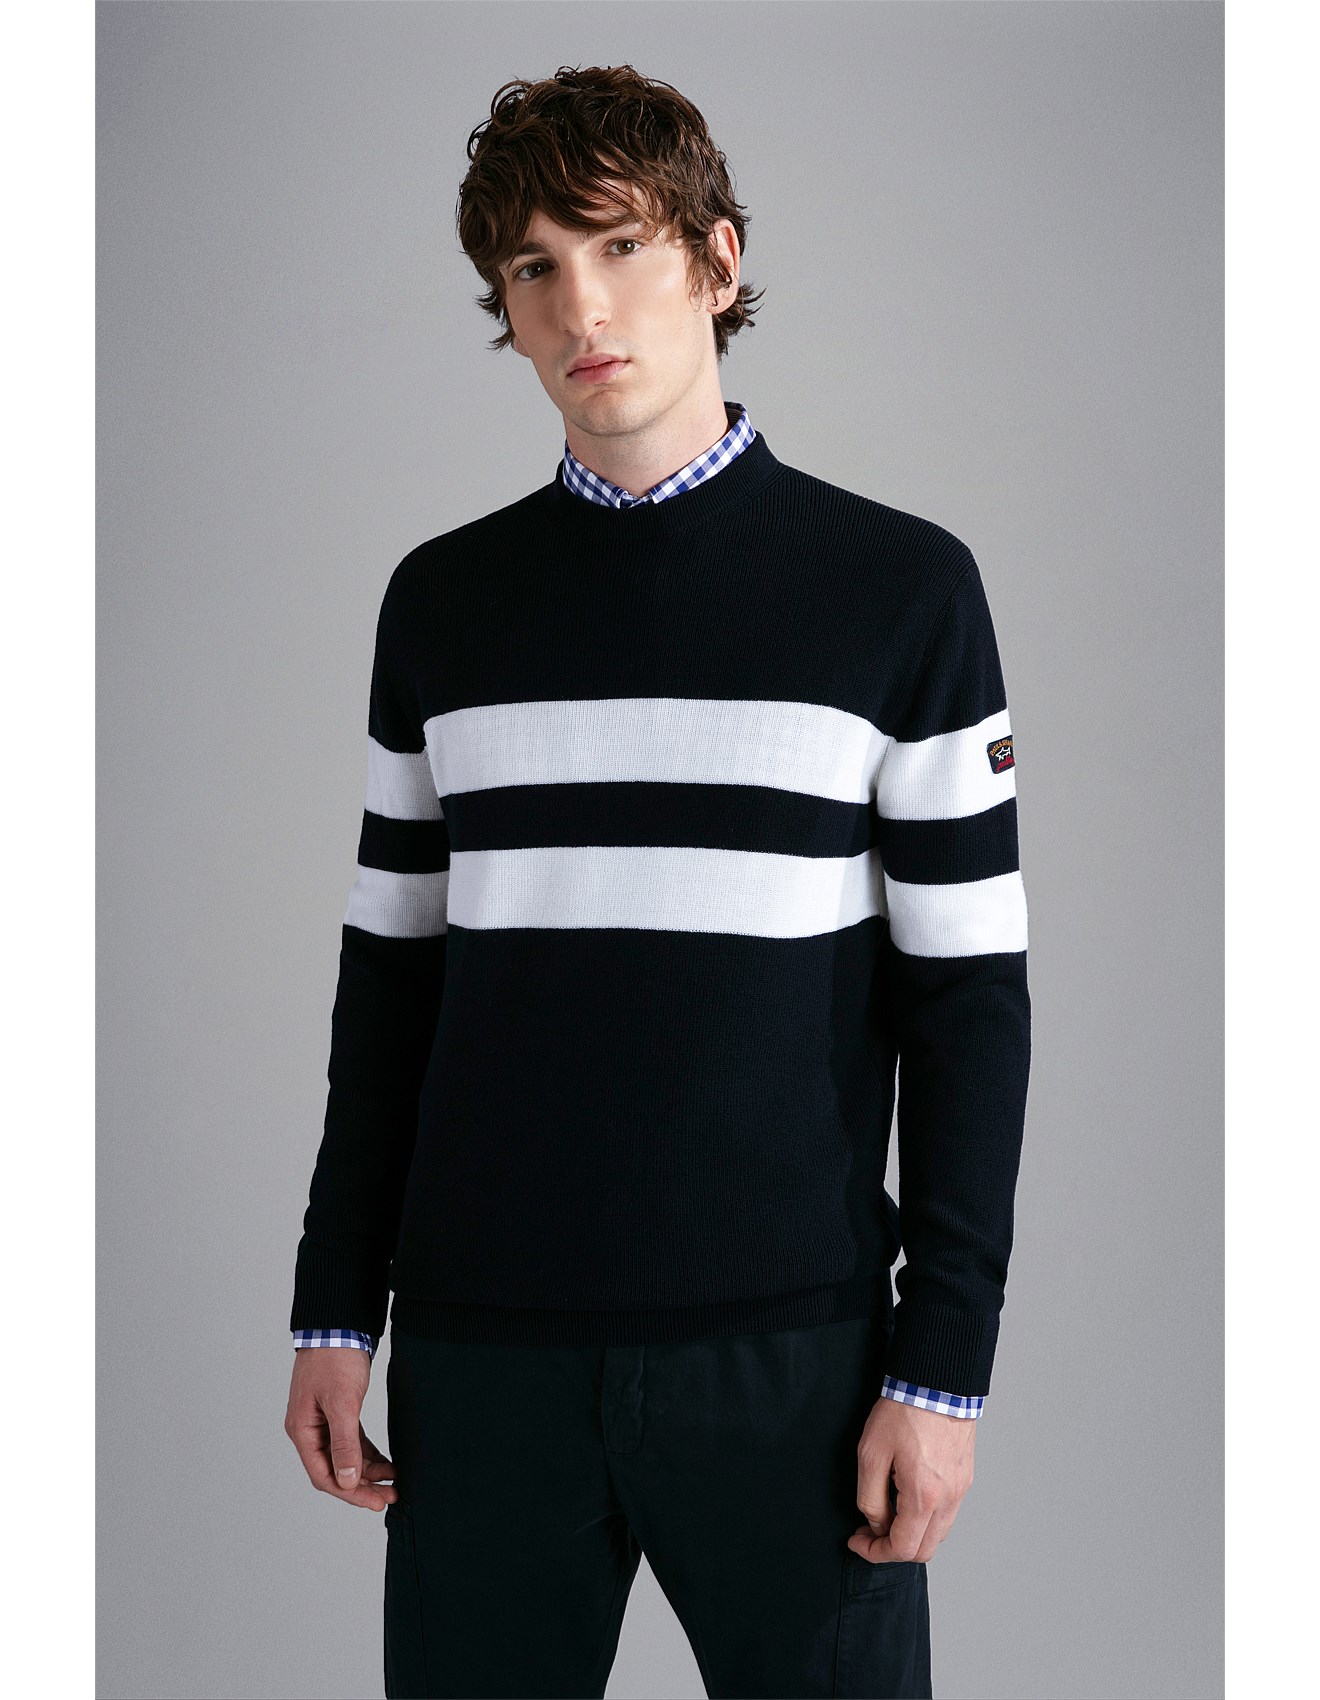 SOFT COOL TOUCH WOOL CREW NECK KNIT